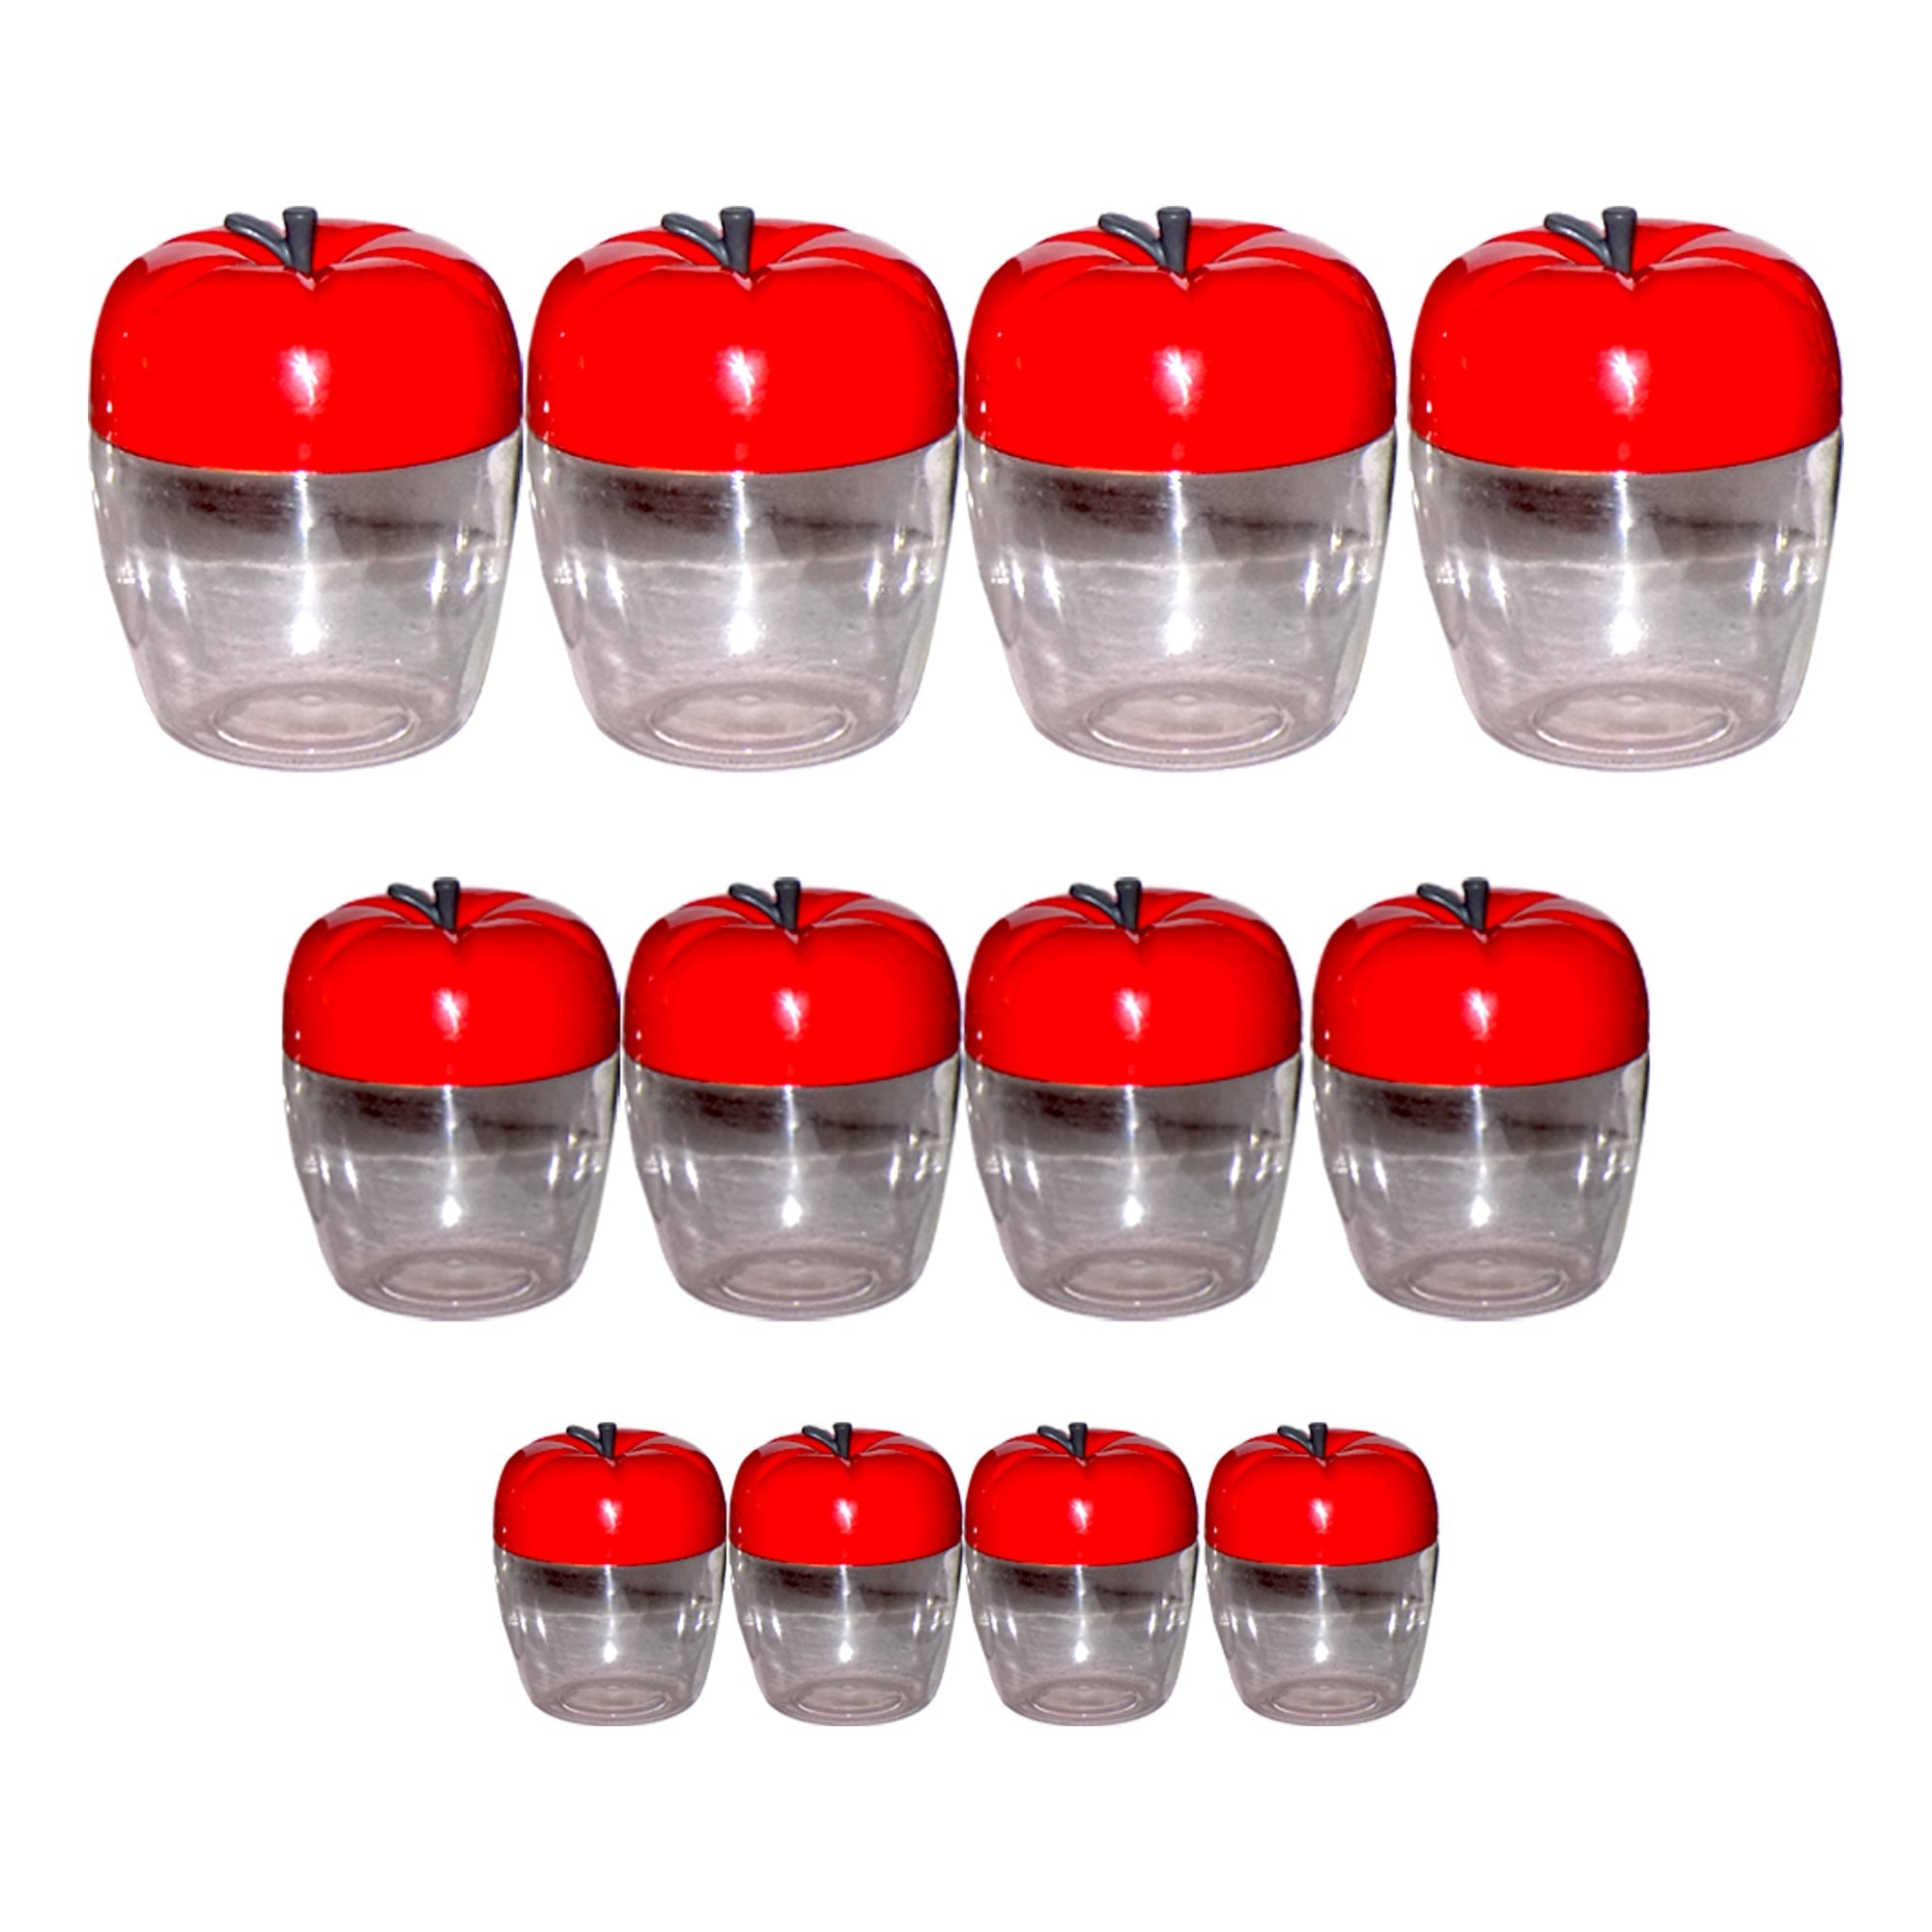 2274 Air Tight Apple Shape Storage Container - 500 ml, 800 ml and 1500 ml (4 Pcs Each Size, 12 Pcs) DeoDap